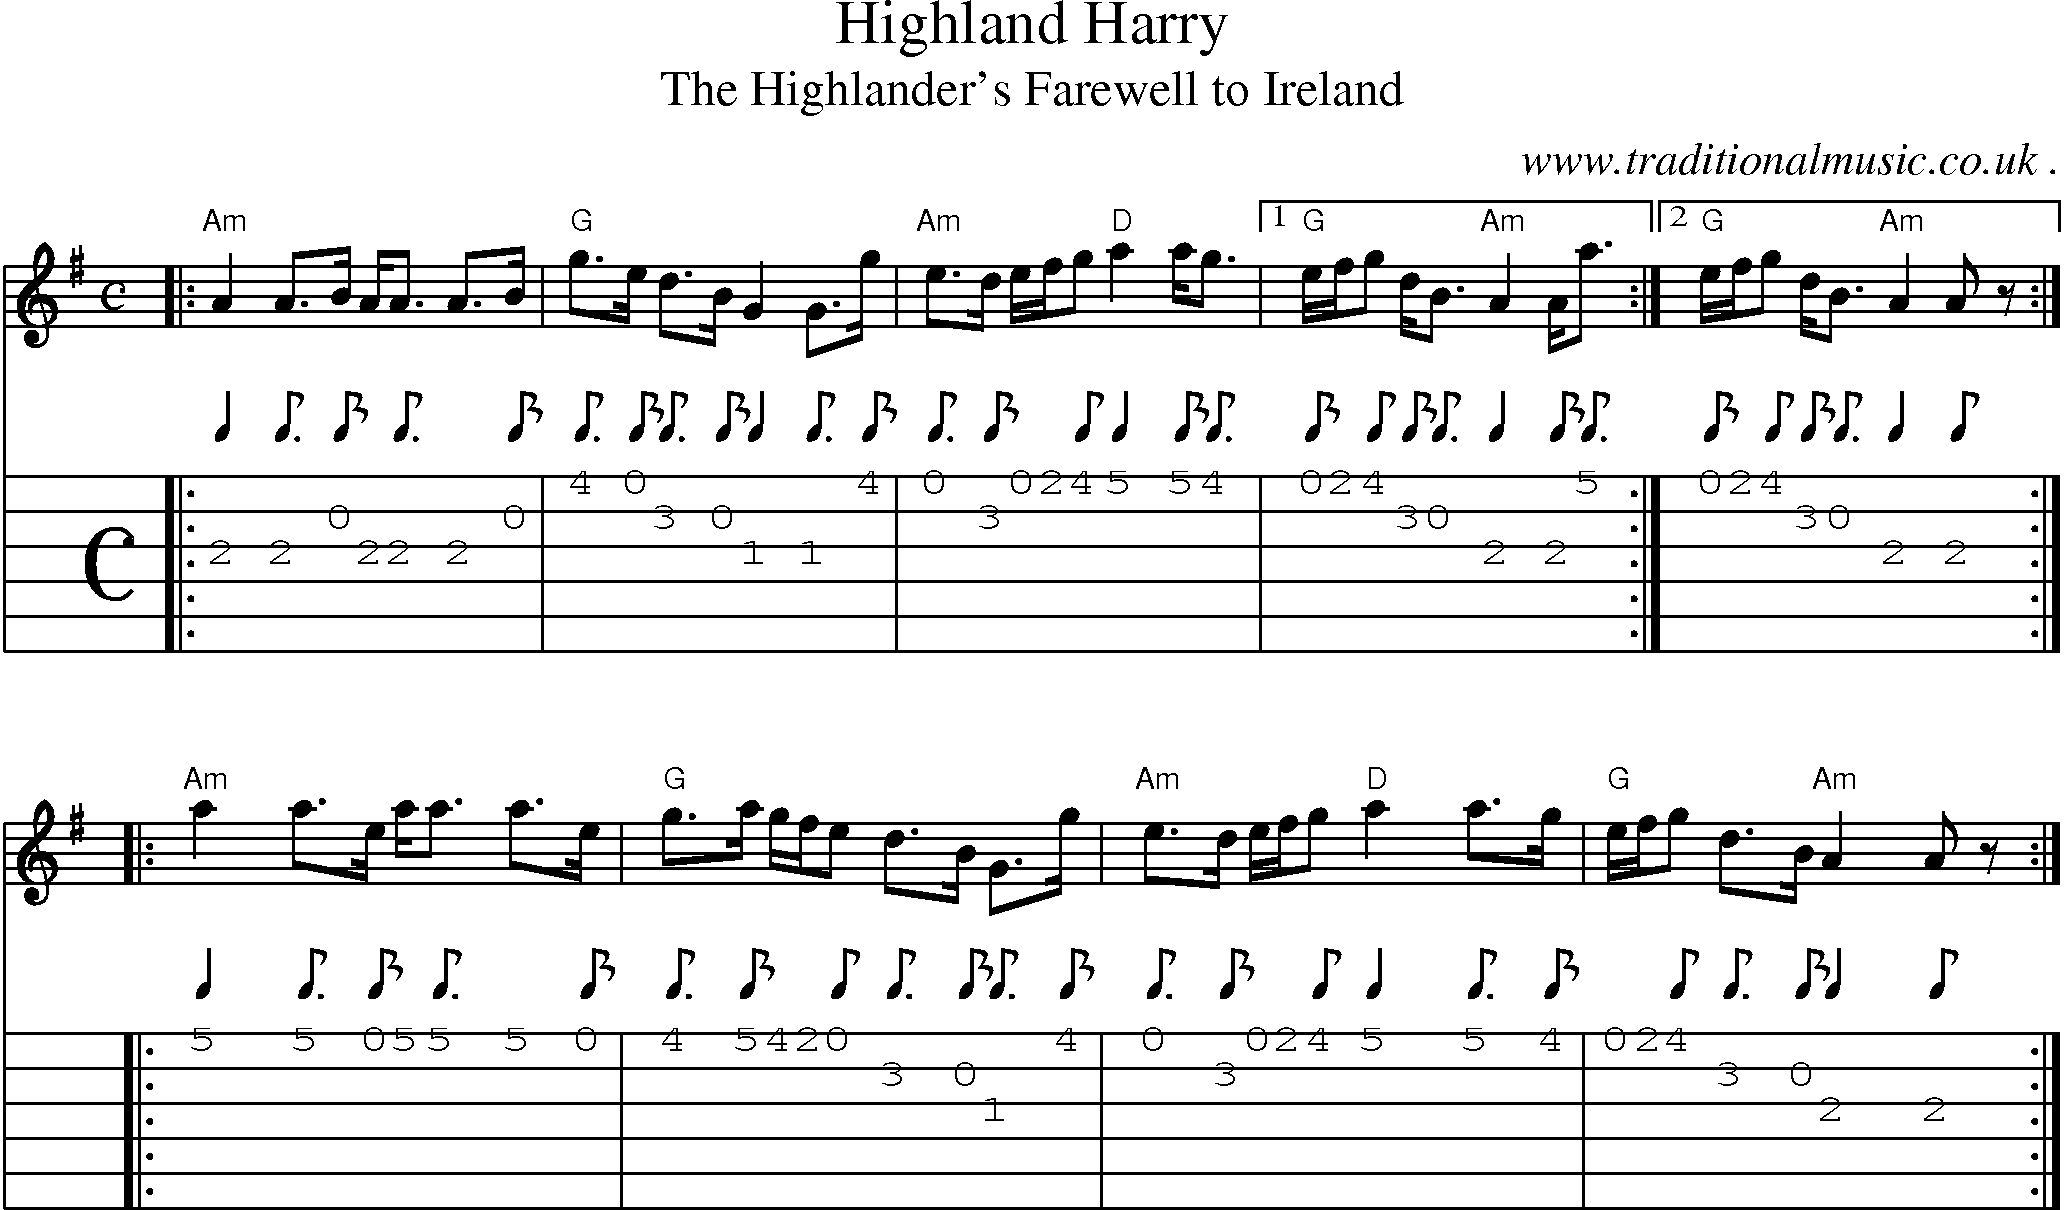 Sheet-music  score, Chords and Guitar Tabs for Highland Harry